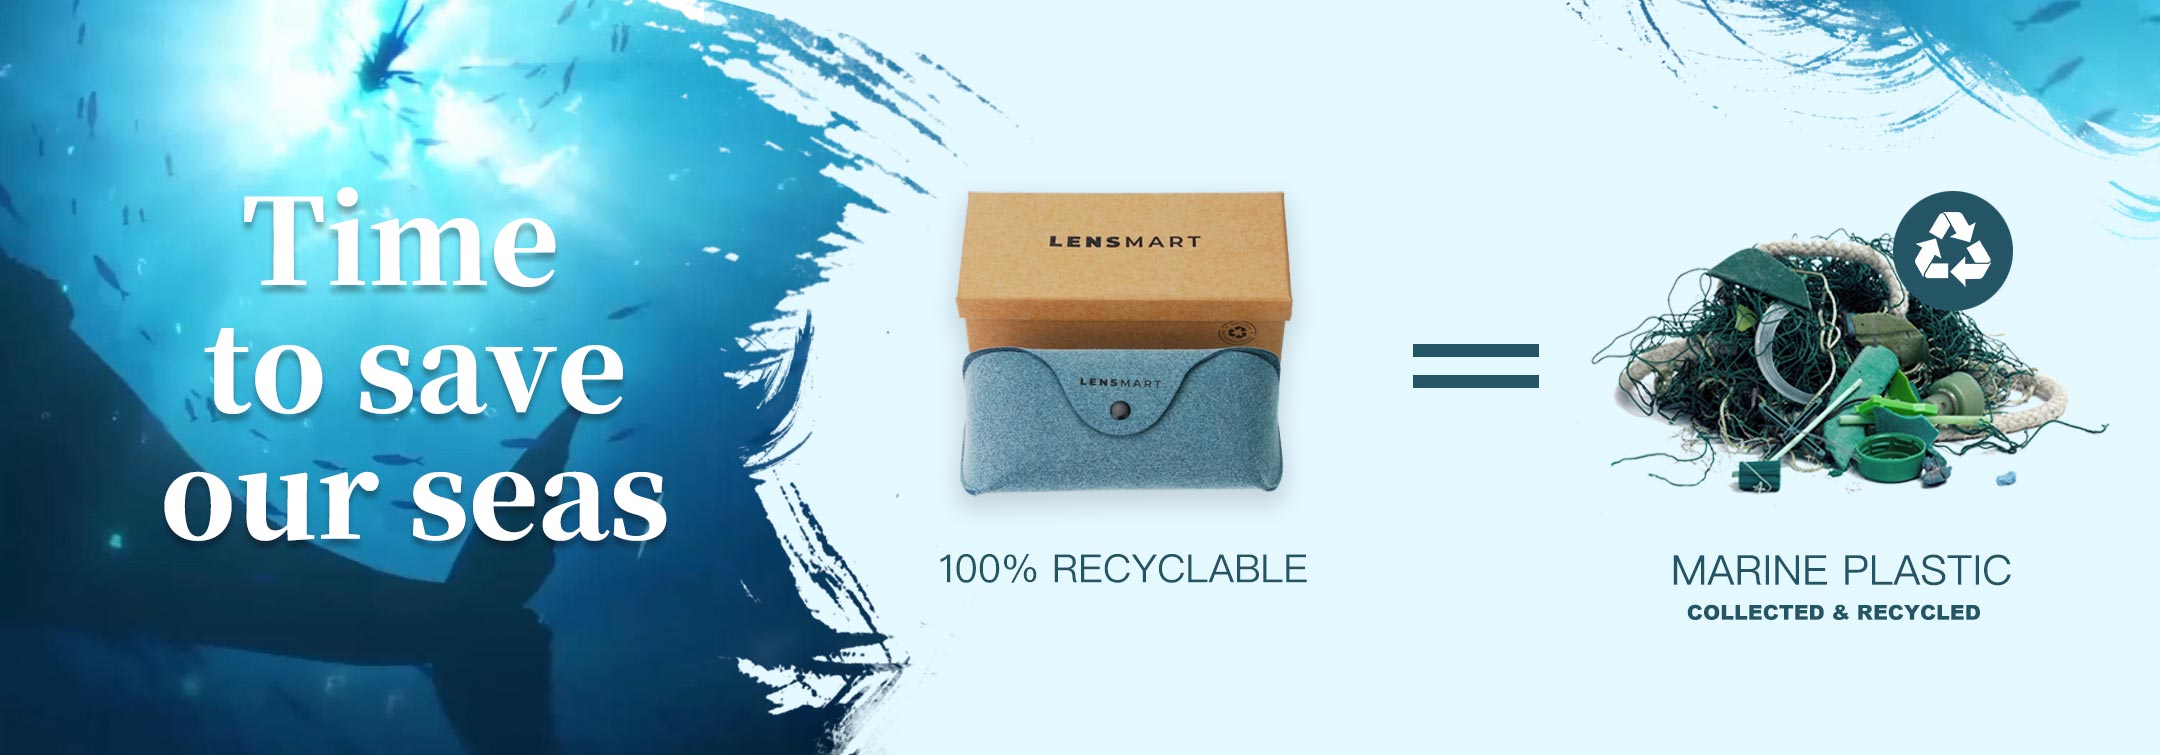 et 100% RECYCLABLE MARINE PLASTIC COLLECTED RECYCLED 